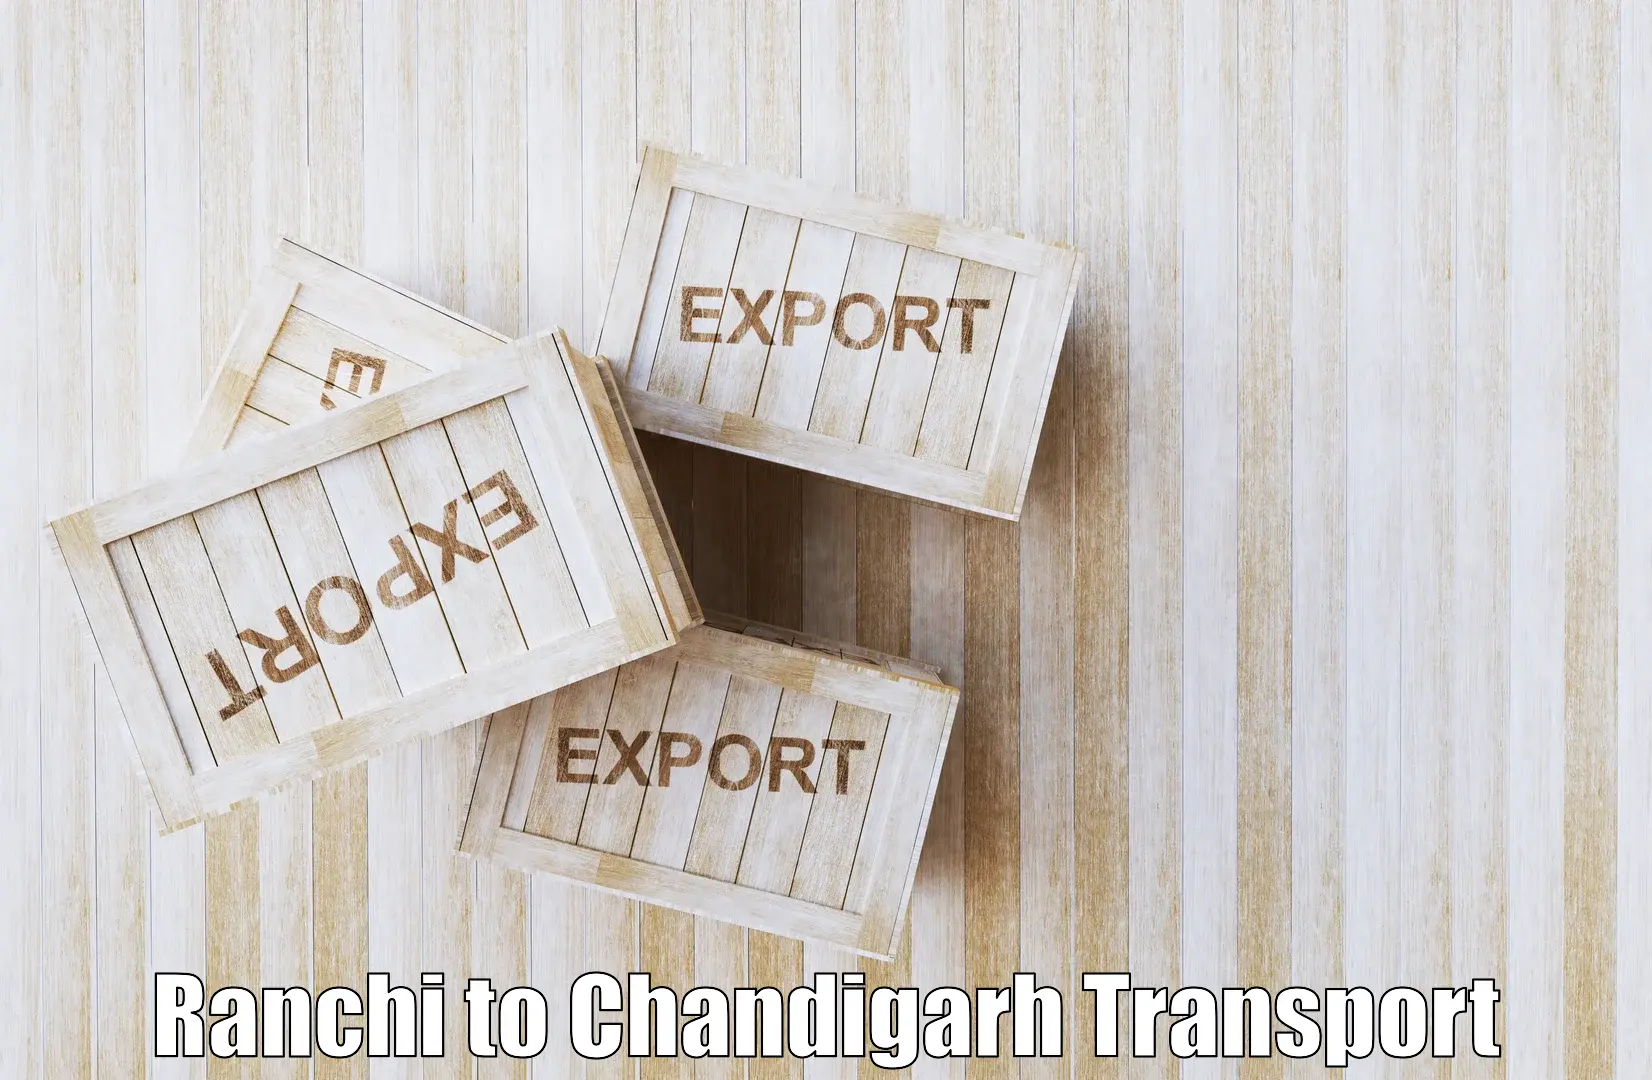 Daily transport service Ranchi to Chandigarh